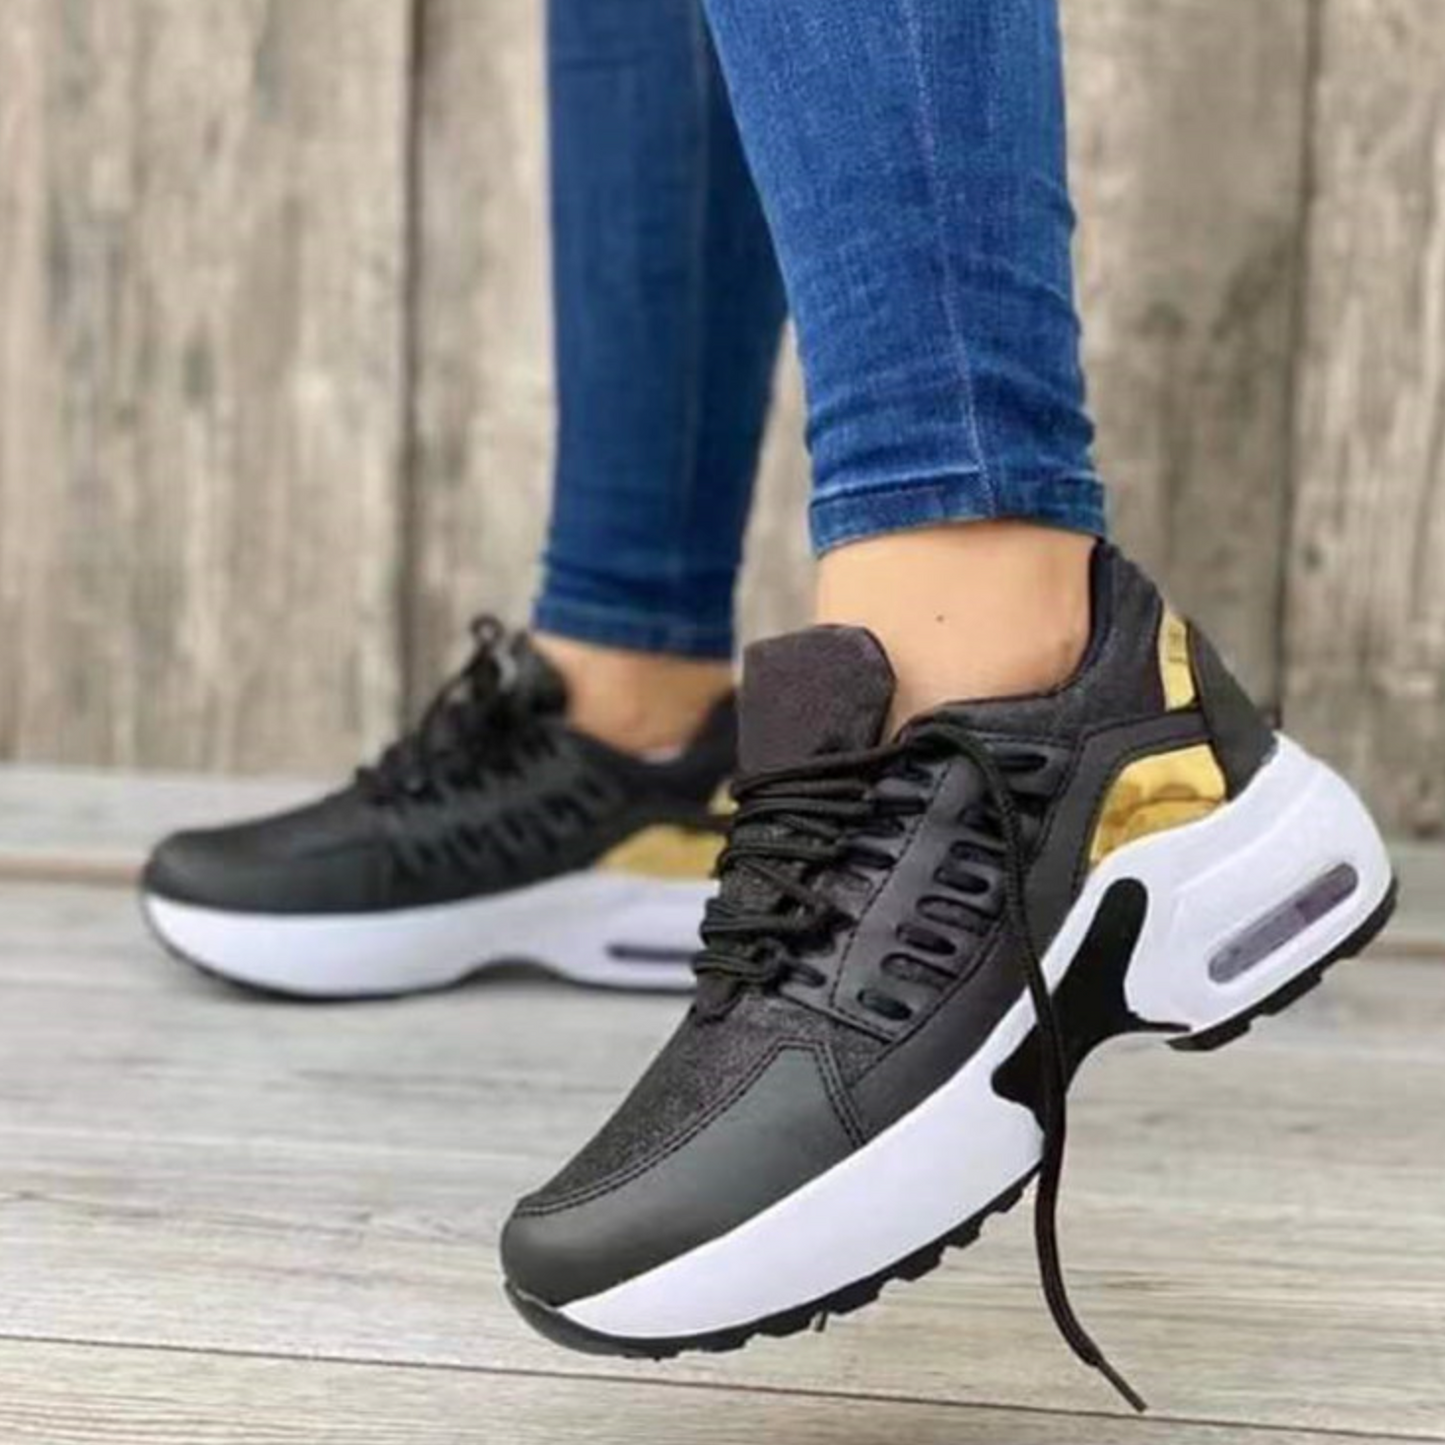 🔥Last day 50% Off🔥Women's Lace up Orthopedic Walking Shoes, Platform Walking Sneakers